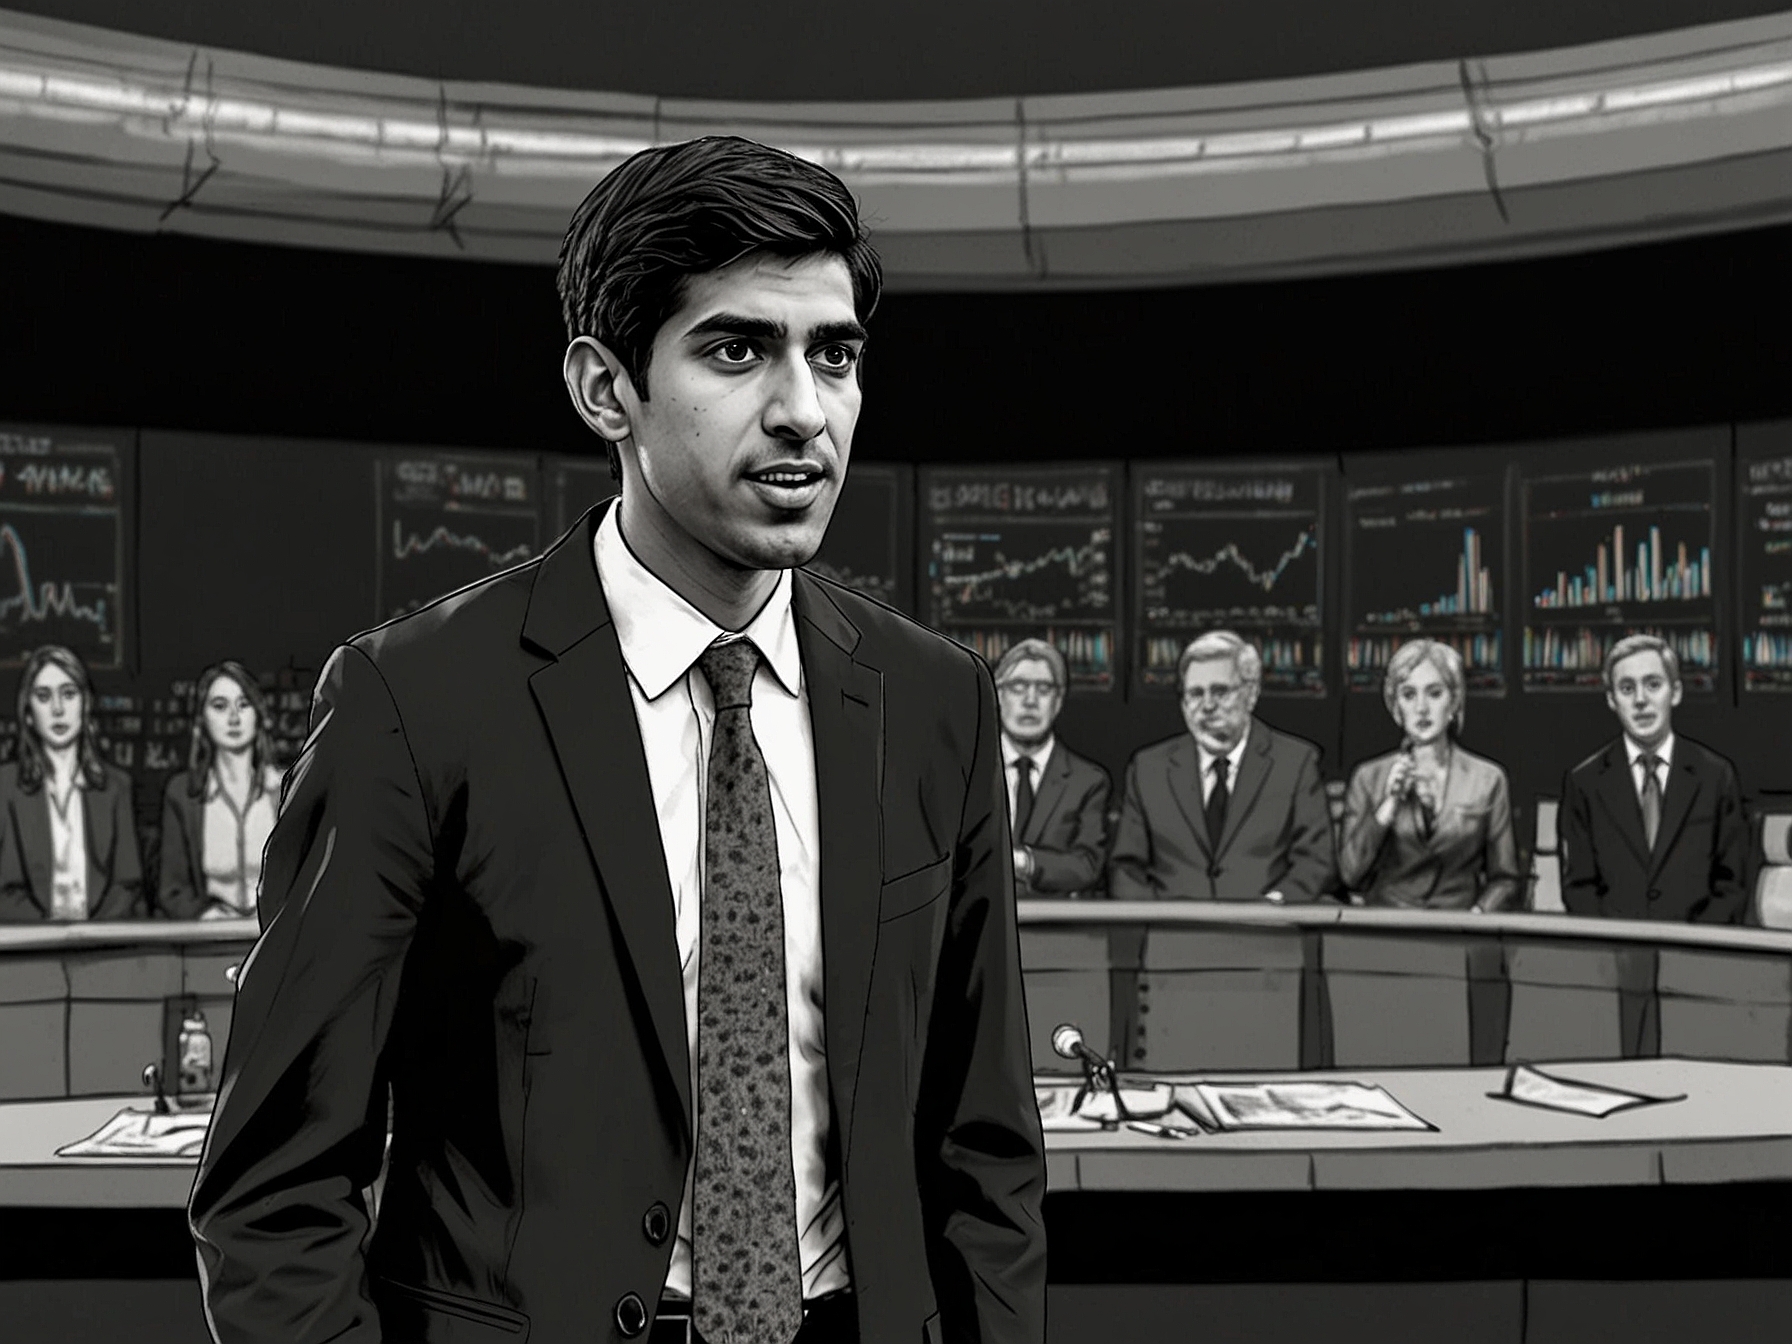 Rishi Sunak confidently presenting economic data during the TV election debate, highlighting his plans for economic recovery and combating inflation to gain audience favor.